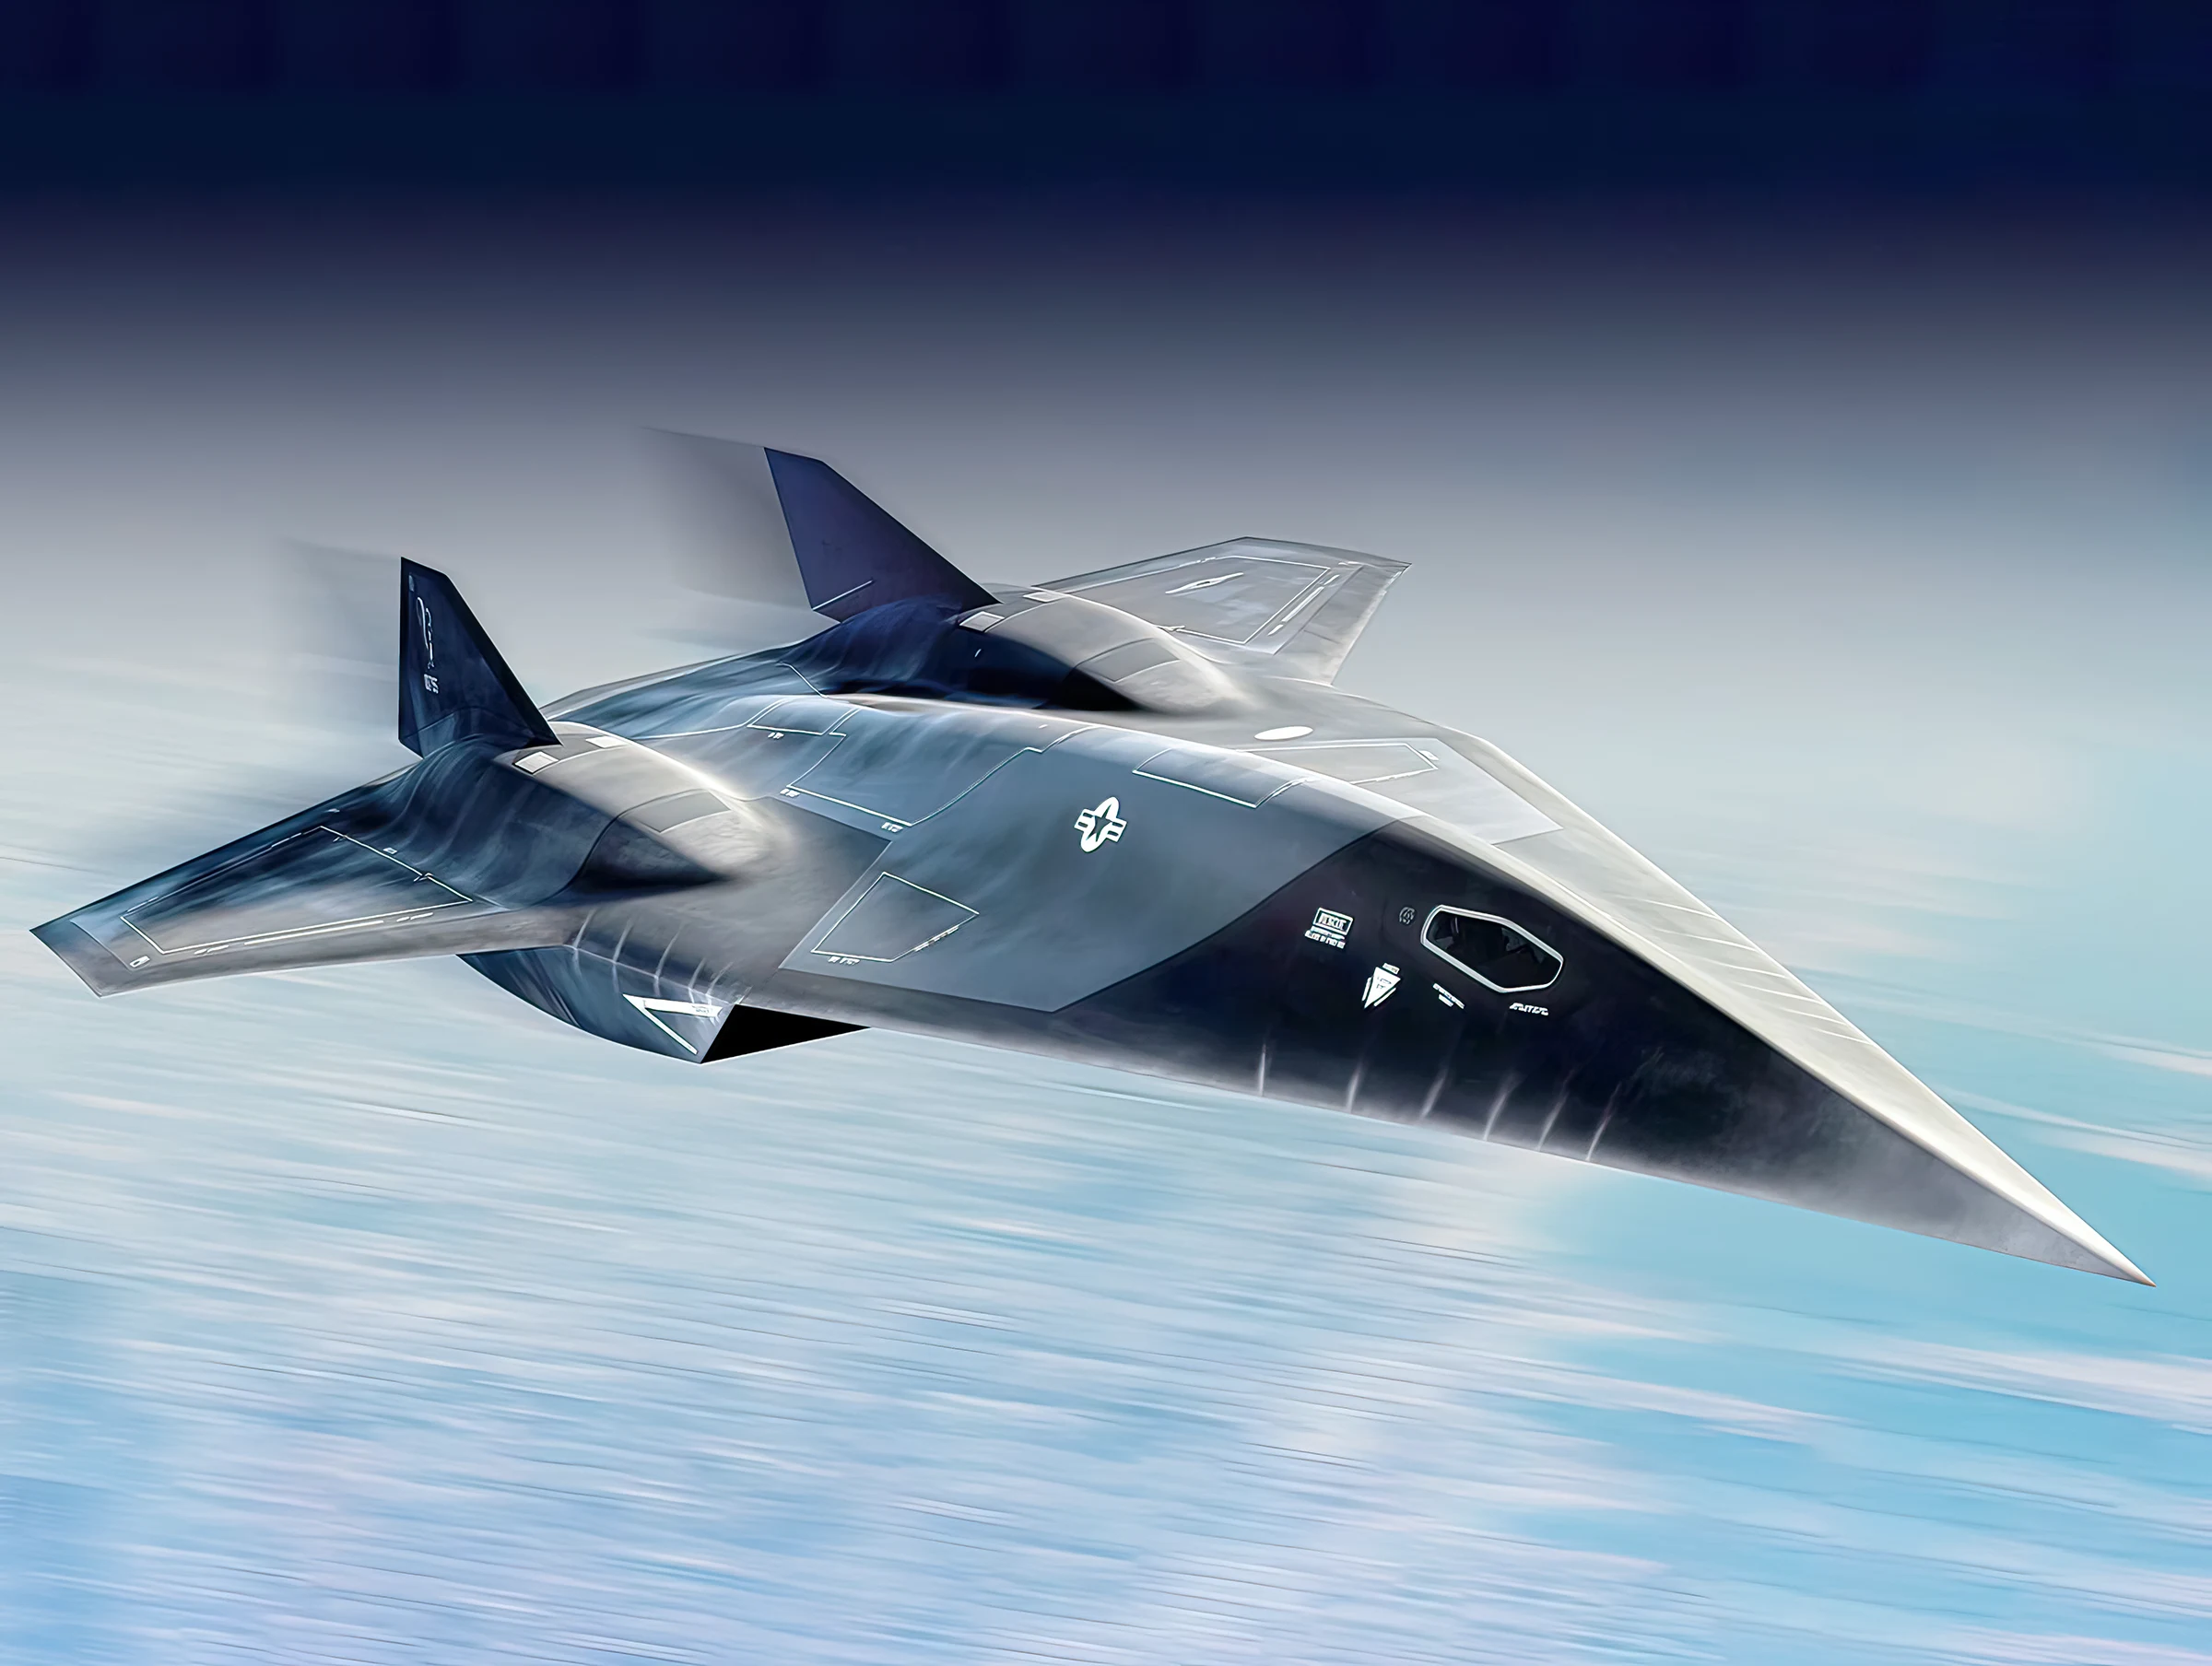 Chaos Hypersonic Military Aircraft: What You Need to Know